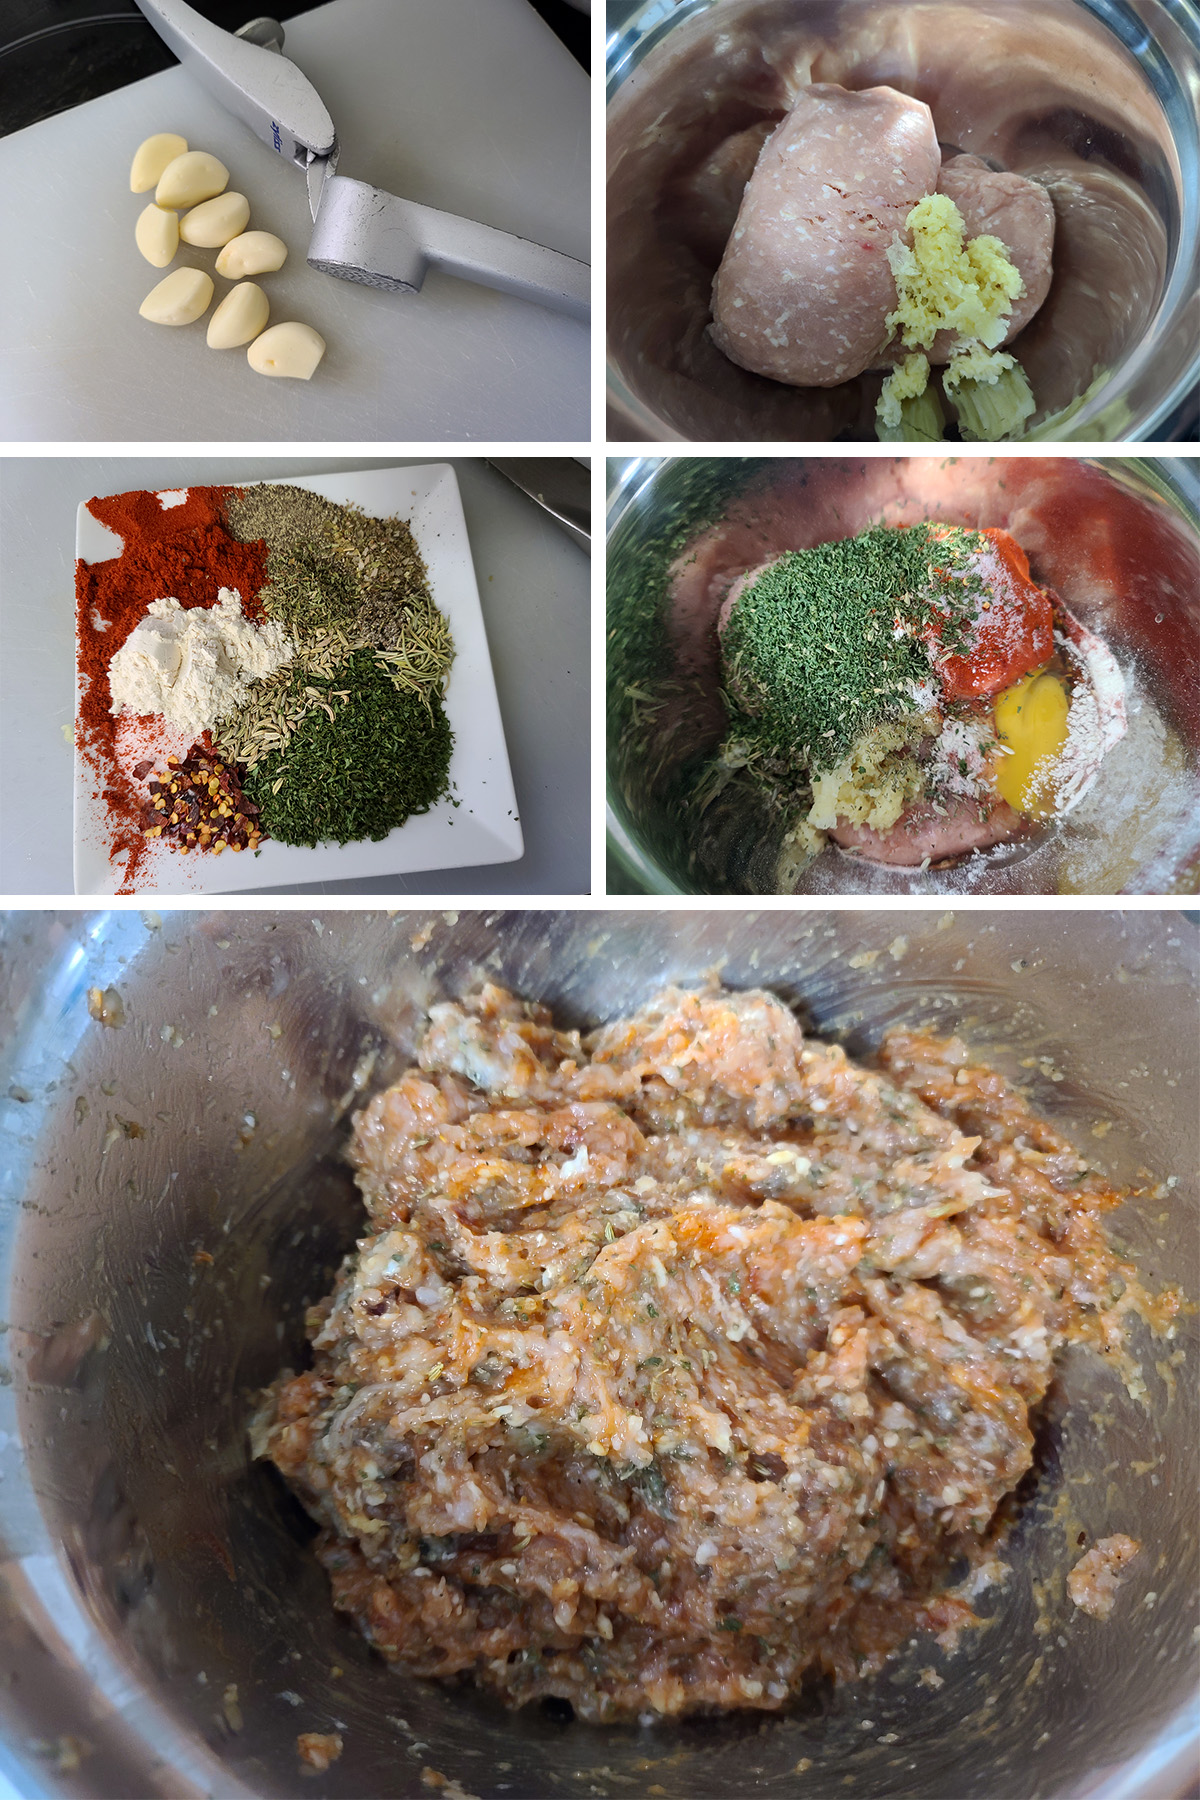 A 5 part image showing the spices being added to the ground chicken and mixed in.